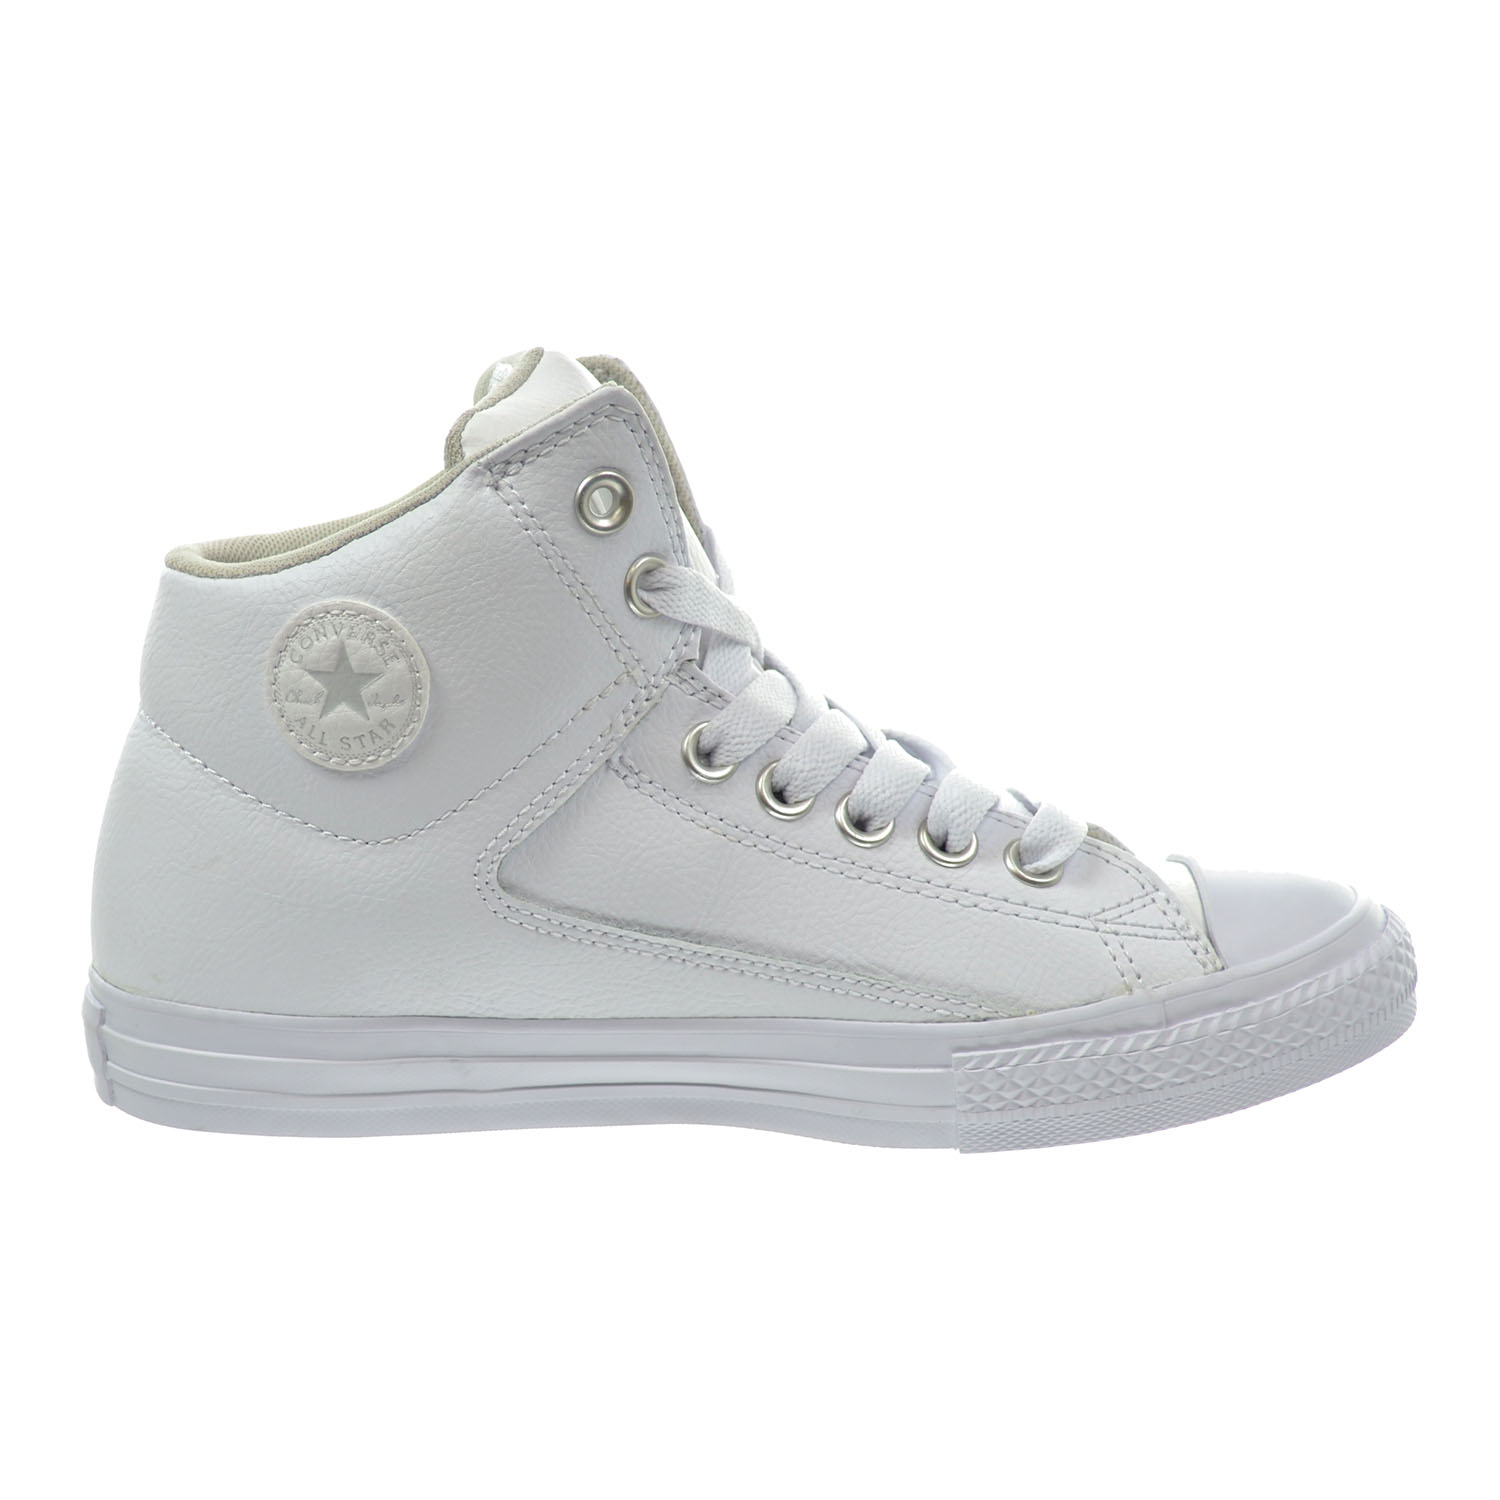 white leather converse size 3.5